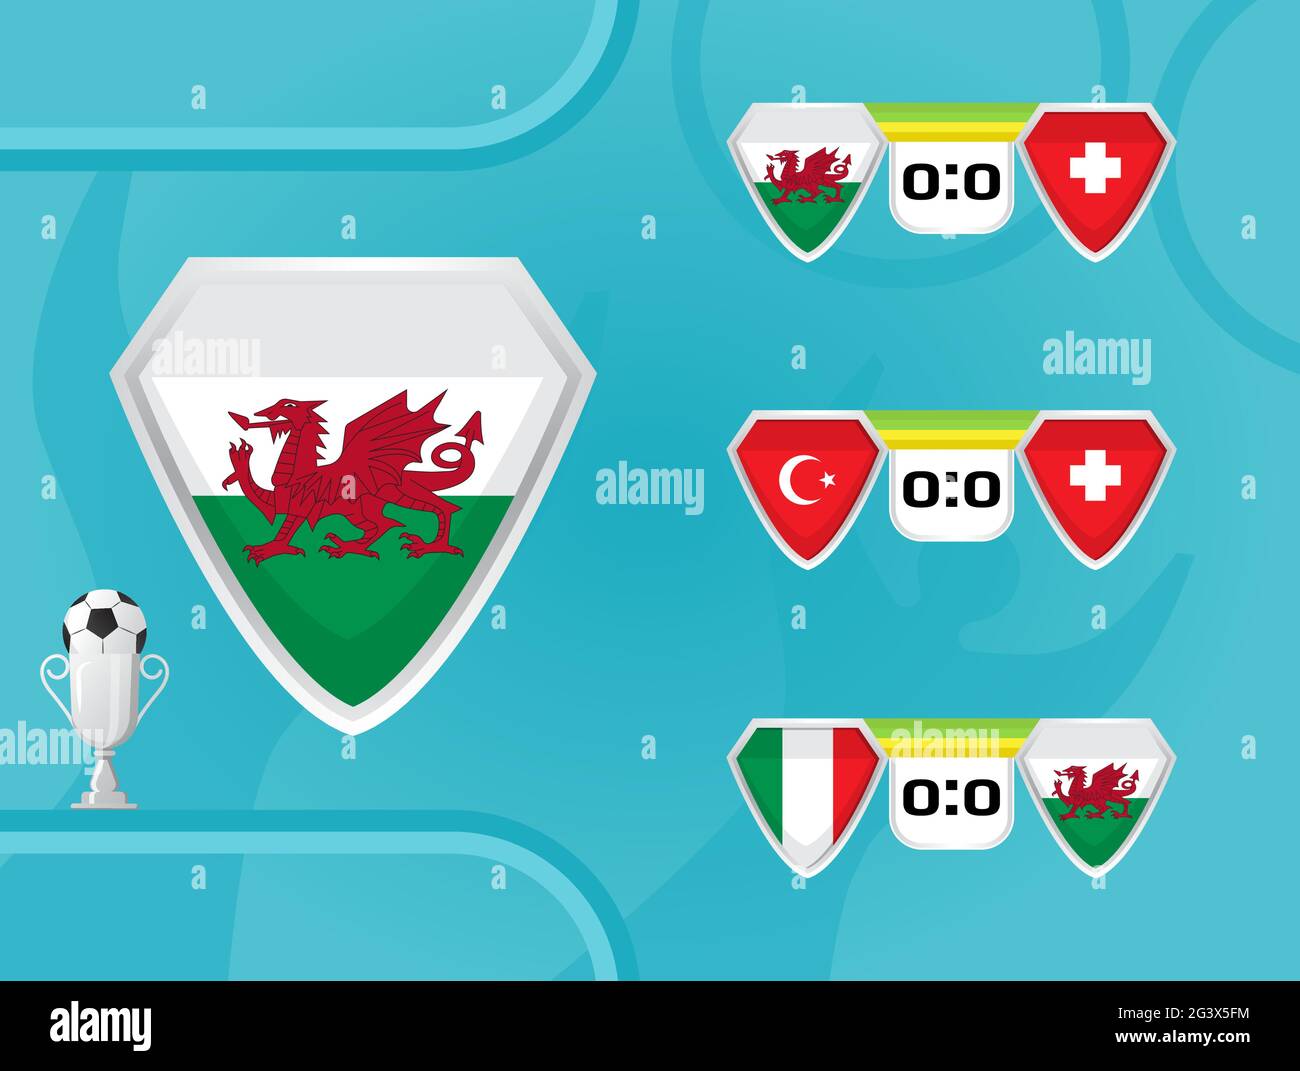 Schedule of national football team of Wales vector. The result of football matches in the European Championship 2020. Shields with the flag of Turkey, Stock Vector